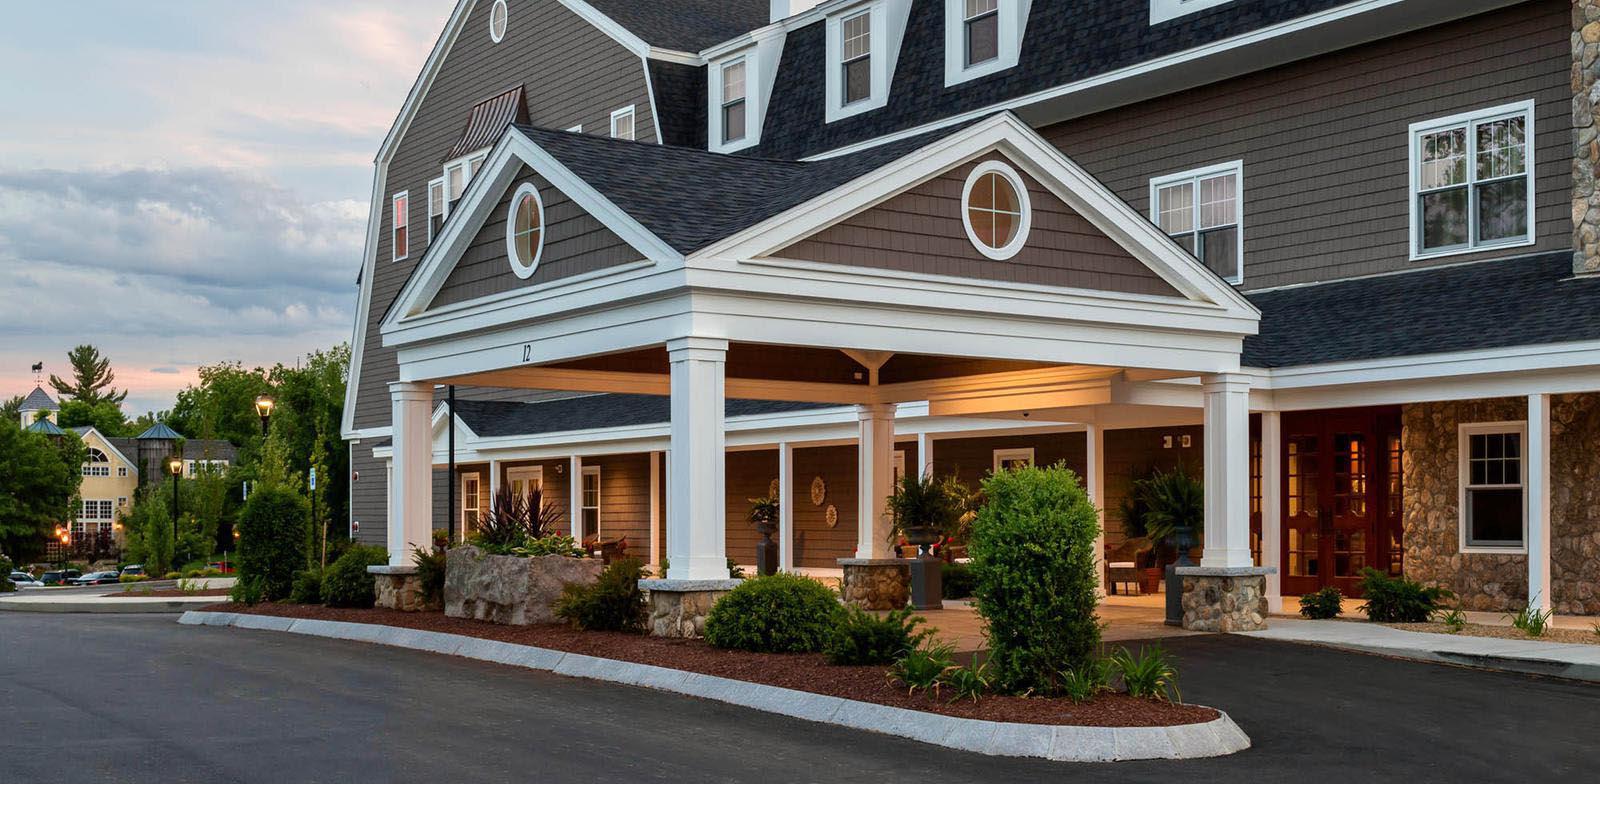 Image of Entrance The Bedford Village Inn, 1810, Member of Historic Hotels of America, in Bedford, New Hampshire, Special Offers, Discounted Rates, Families, Romantic Escape, Honeymoons, Anniversaries, Reunions